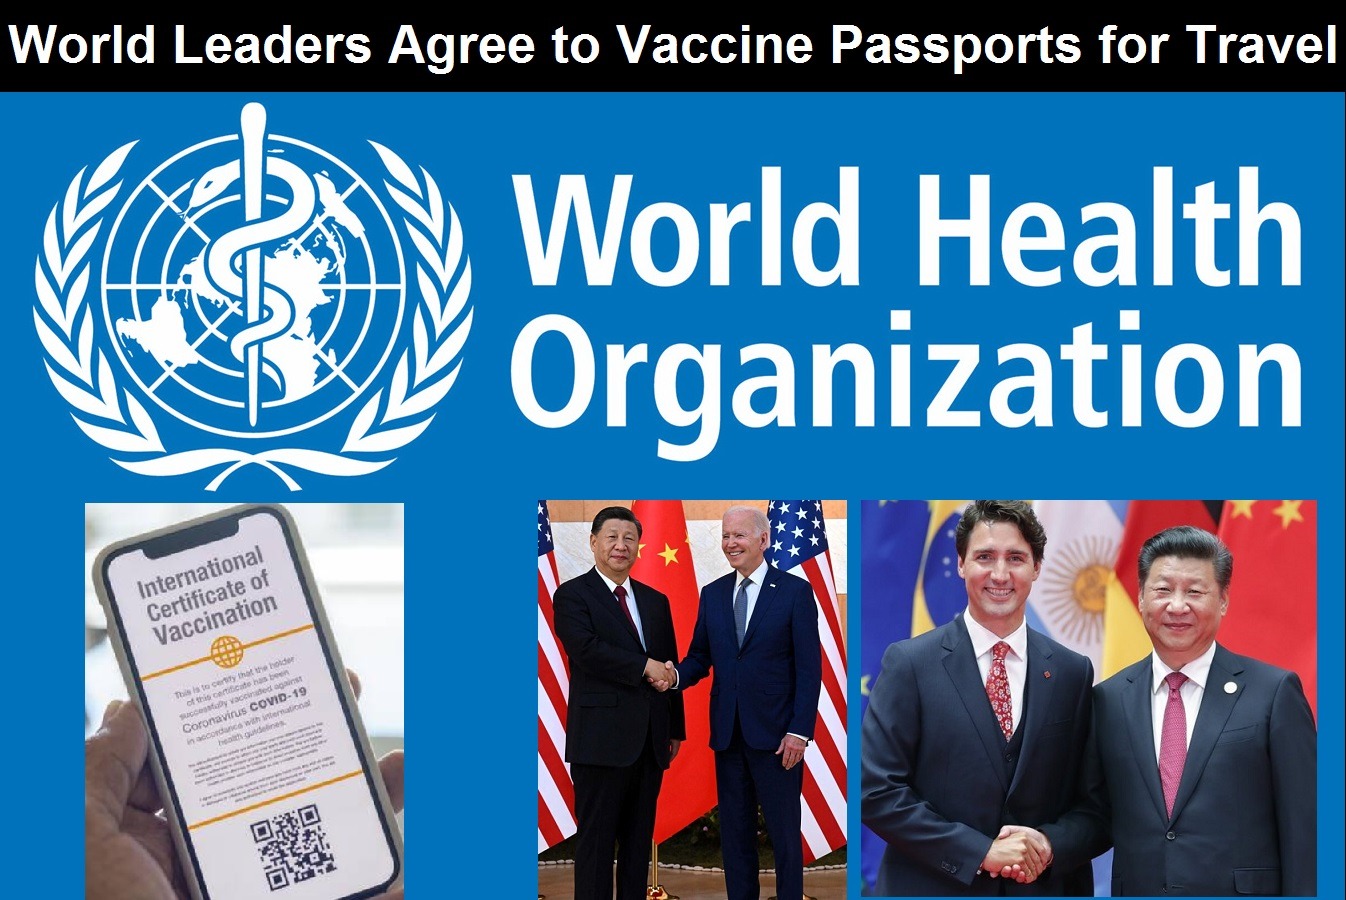 World leaders agree to vaccine passports for international travel